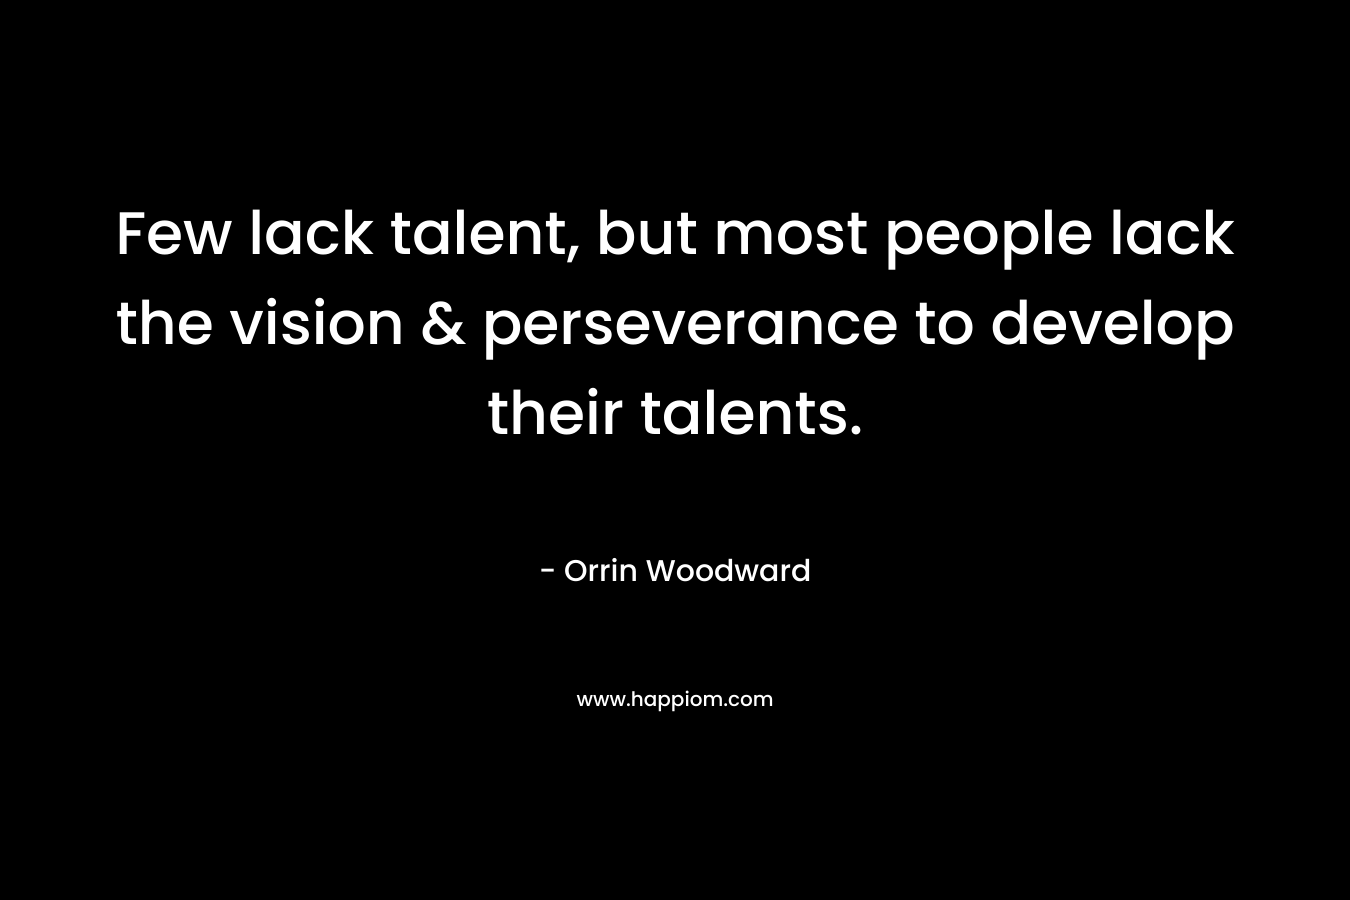 Few lack talent, but most people lack the vision & perseverance to develop their talents. – Orrin Woodward